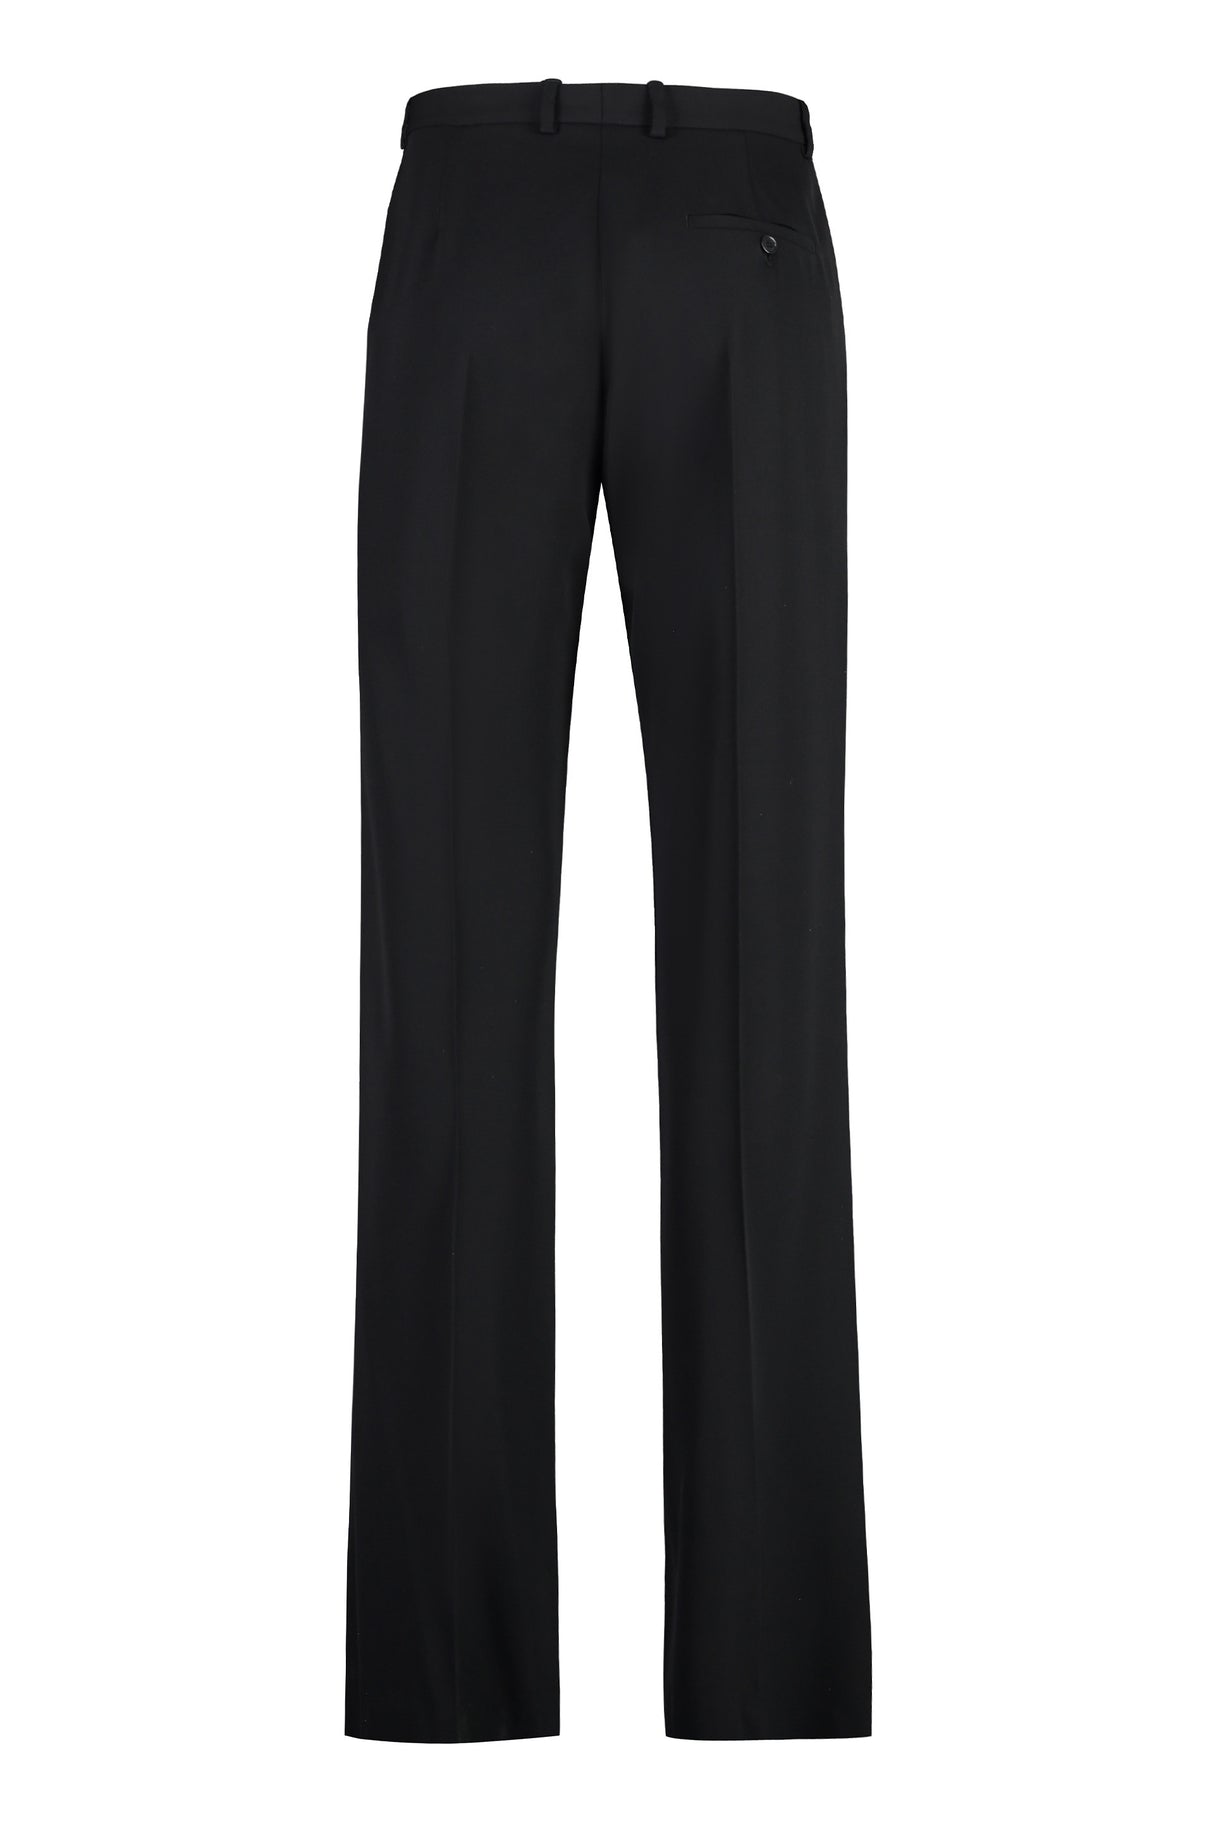 BALENCIAGA Men's Black Wool Tailored Trousers for SS24